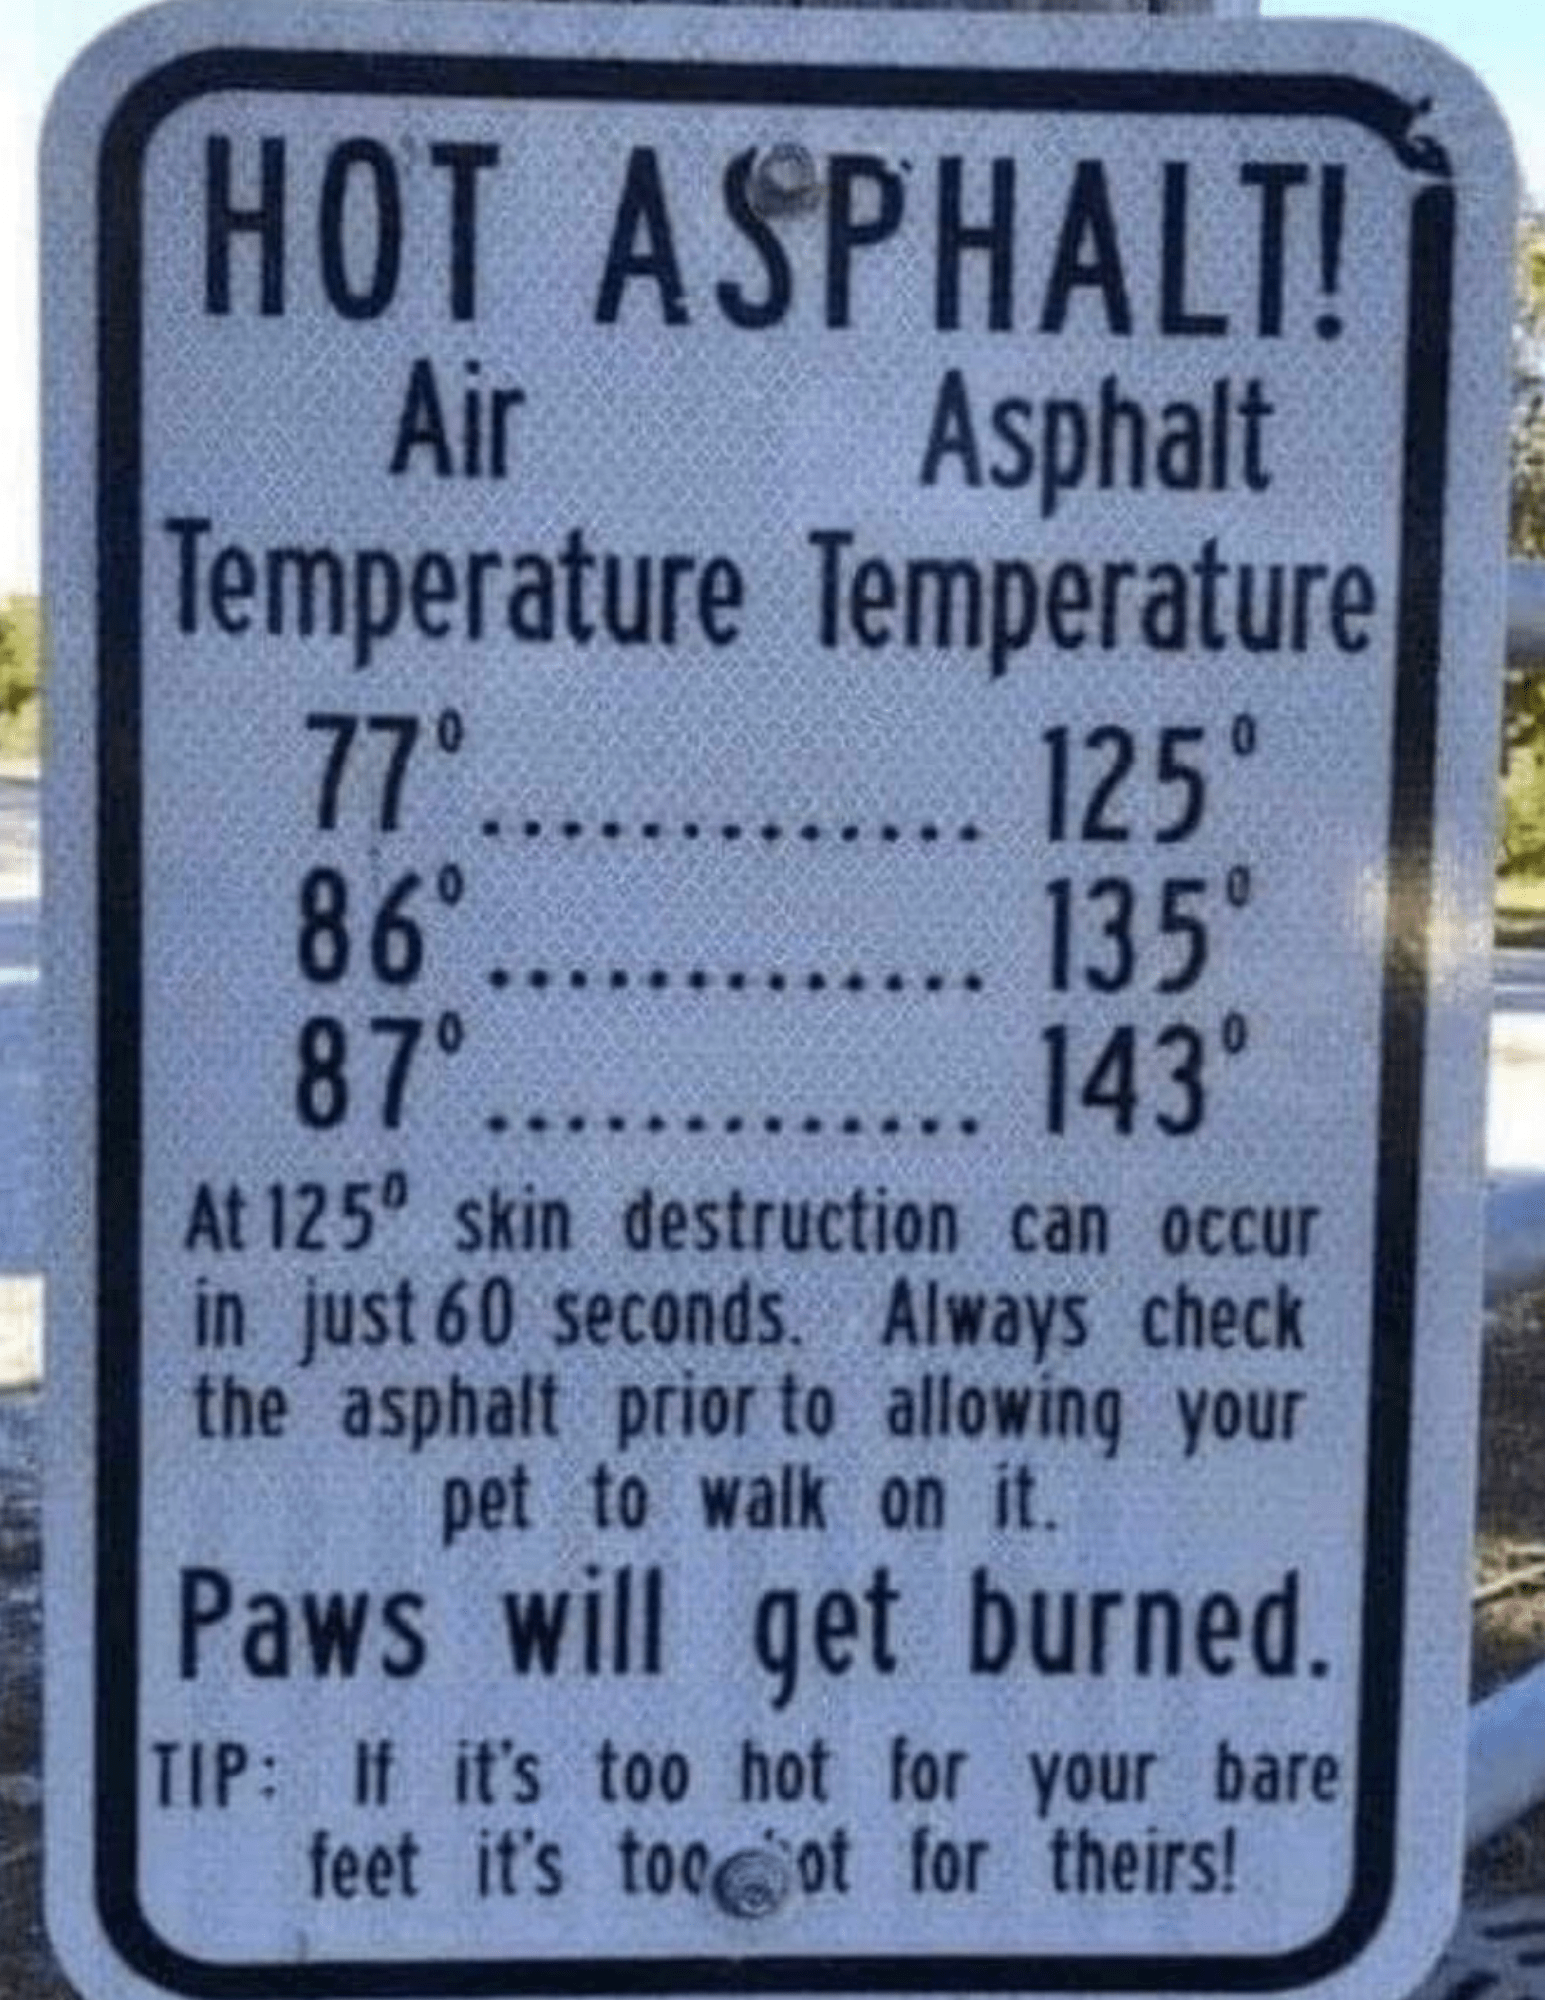 shows the tempeture difference between air and asphalt for you dog's paws